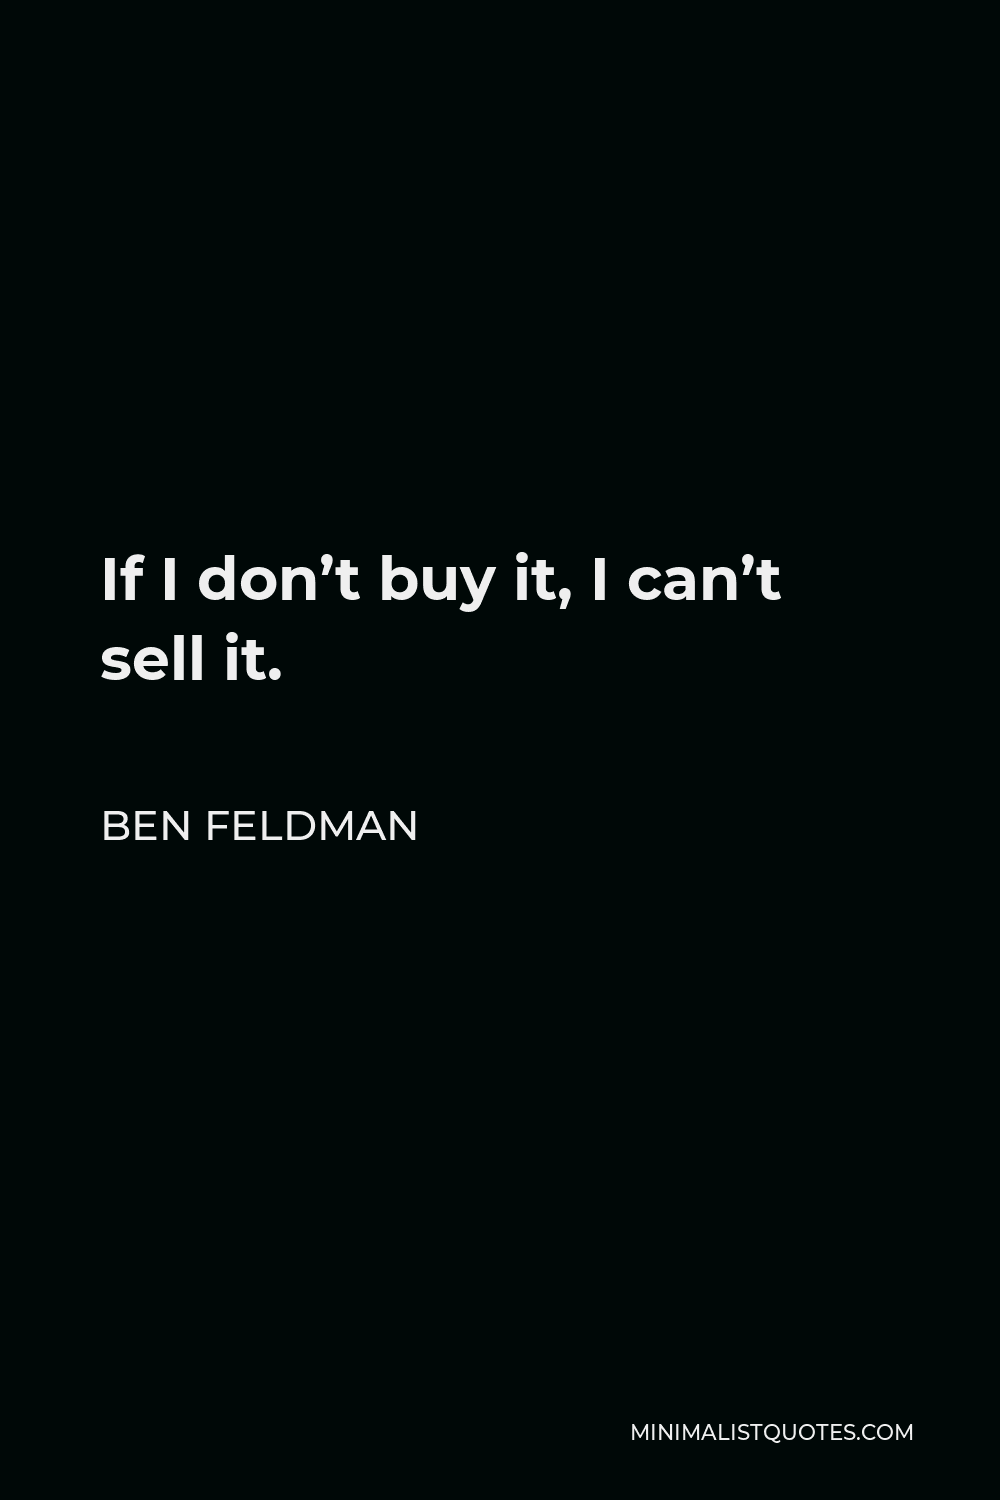 Ben Feldman Quote If I don't buy it, I can't sell it.